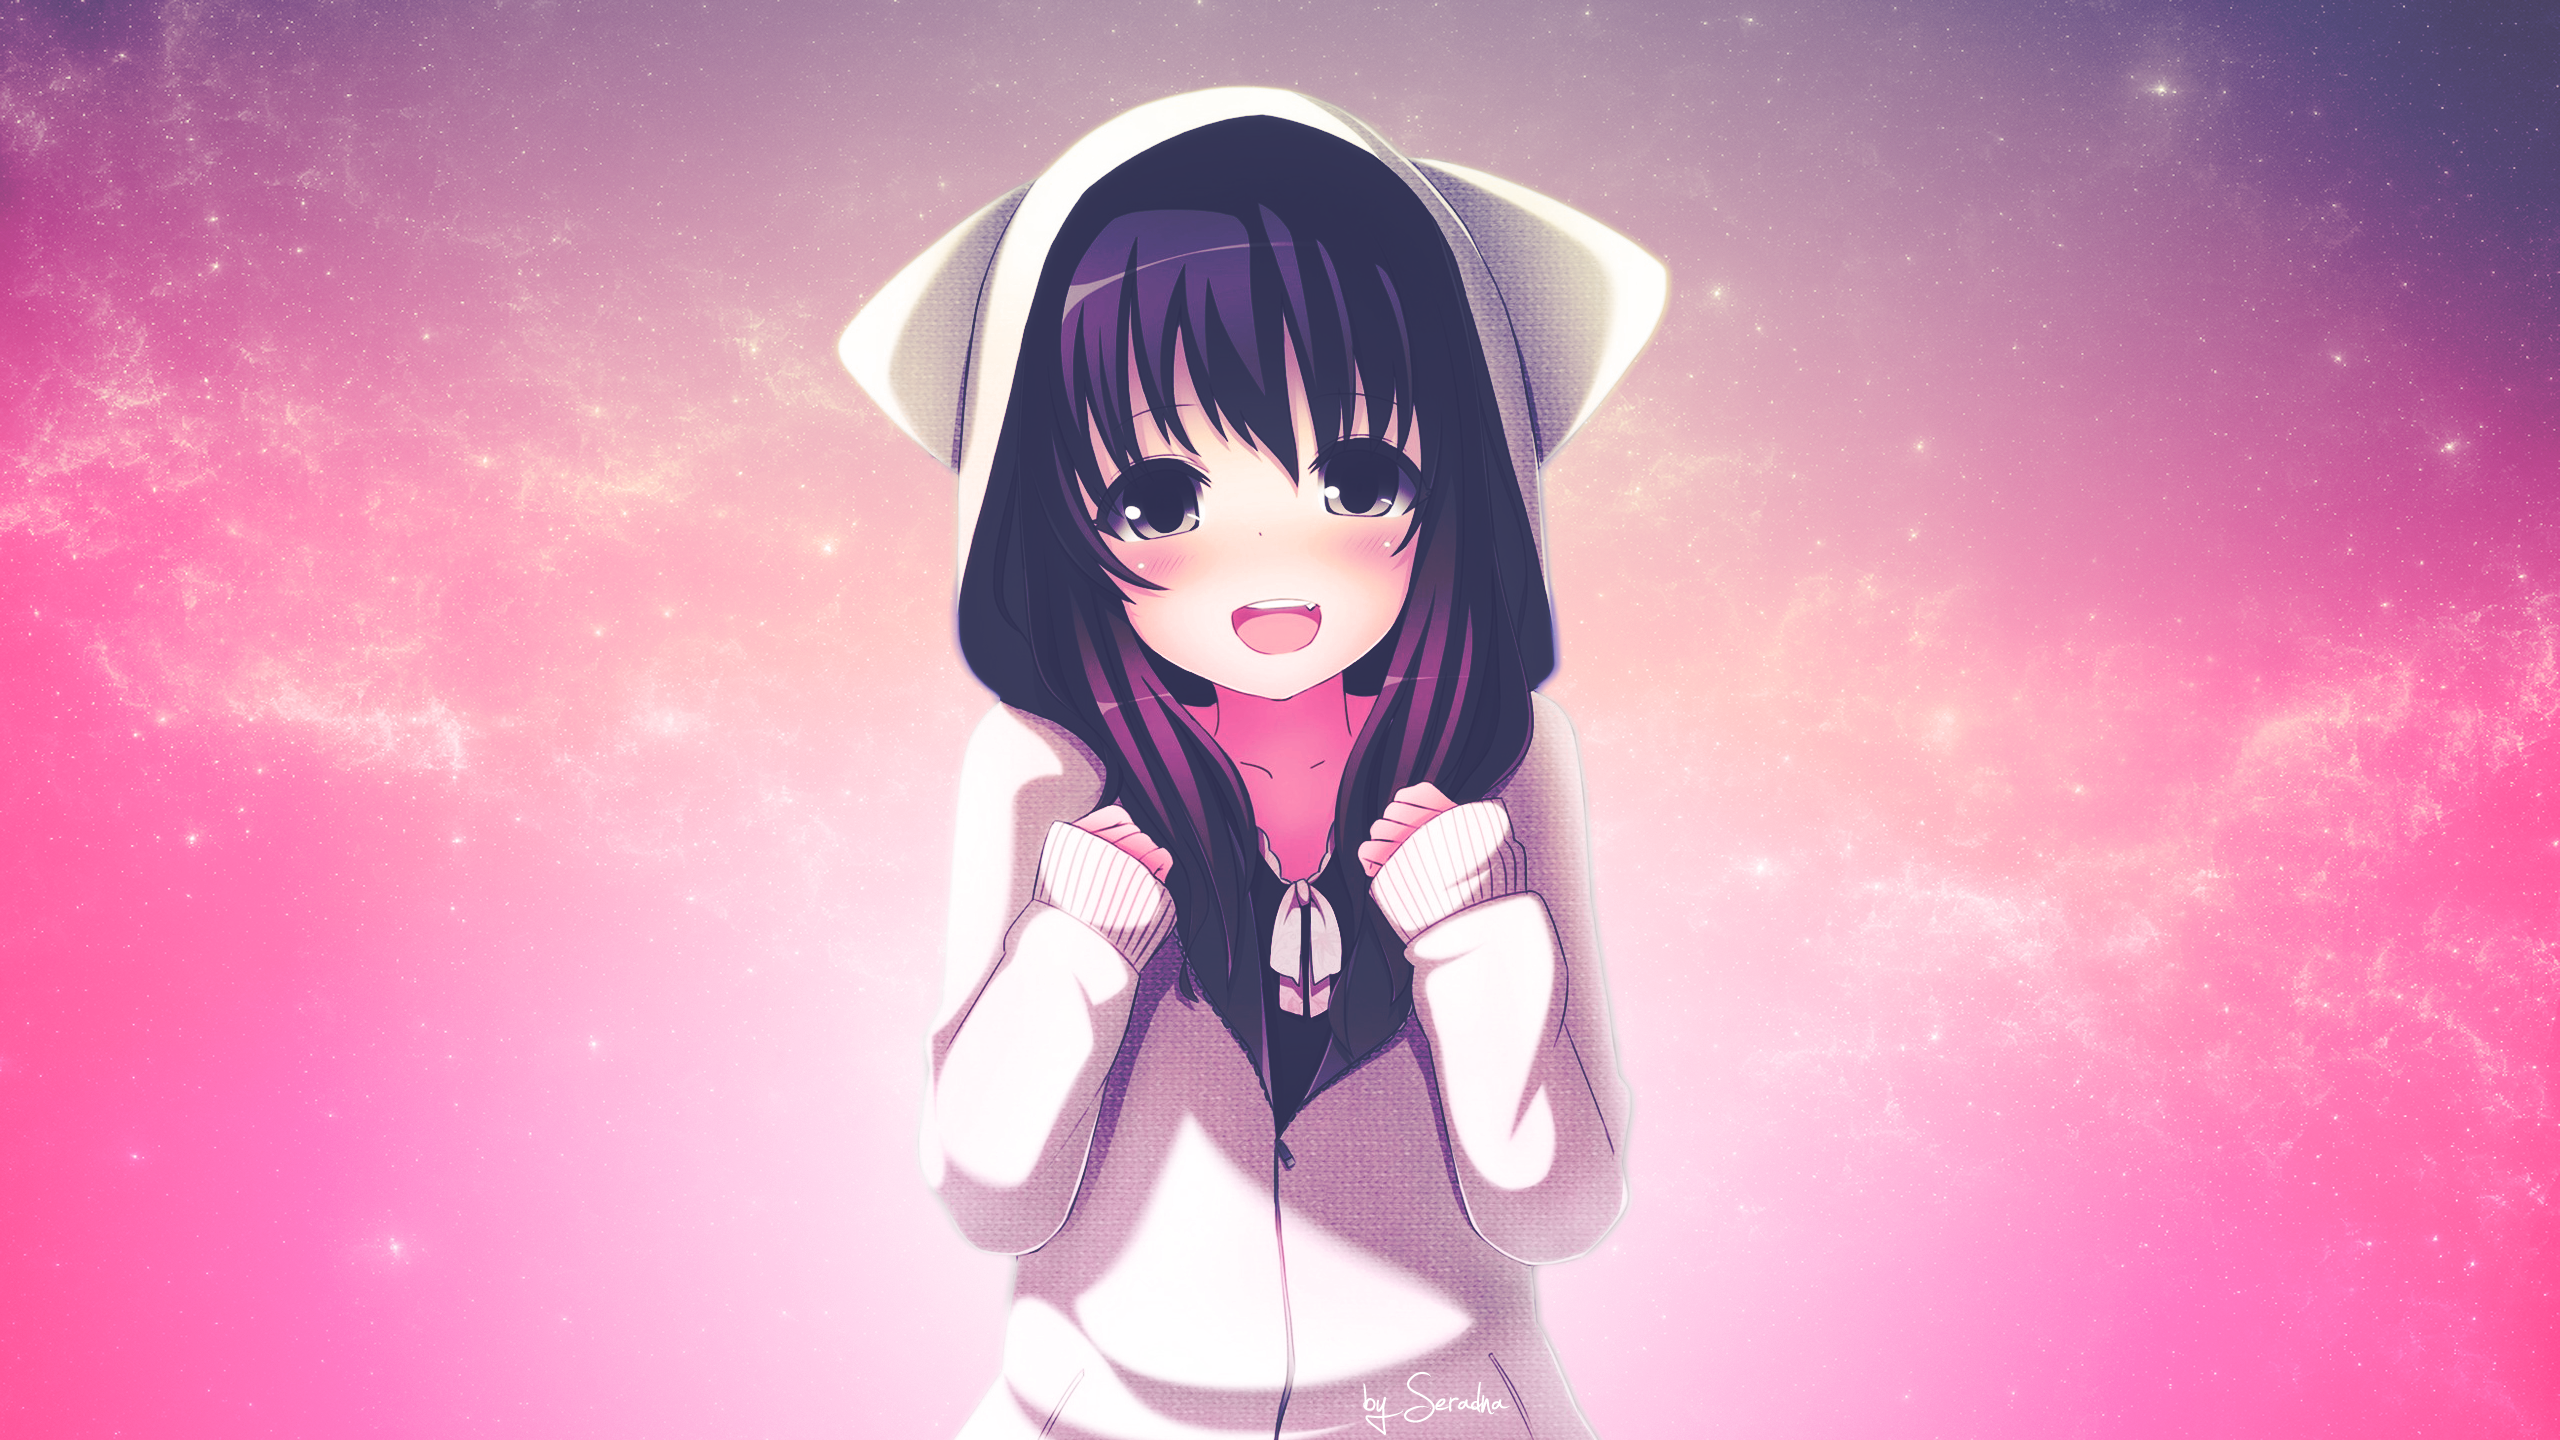 Cute Anime Wallpaper For Iphone wallpaper   1332614